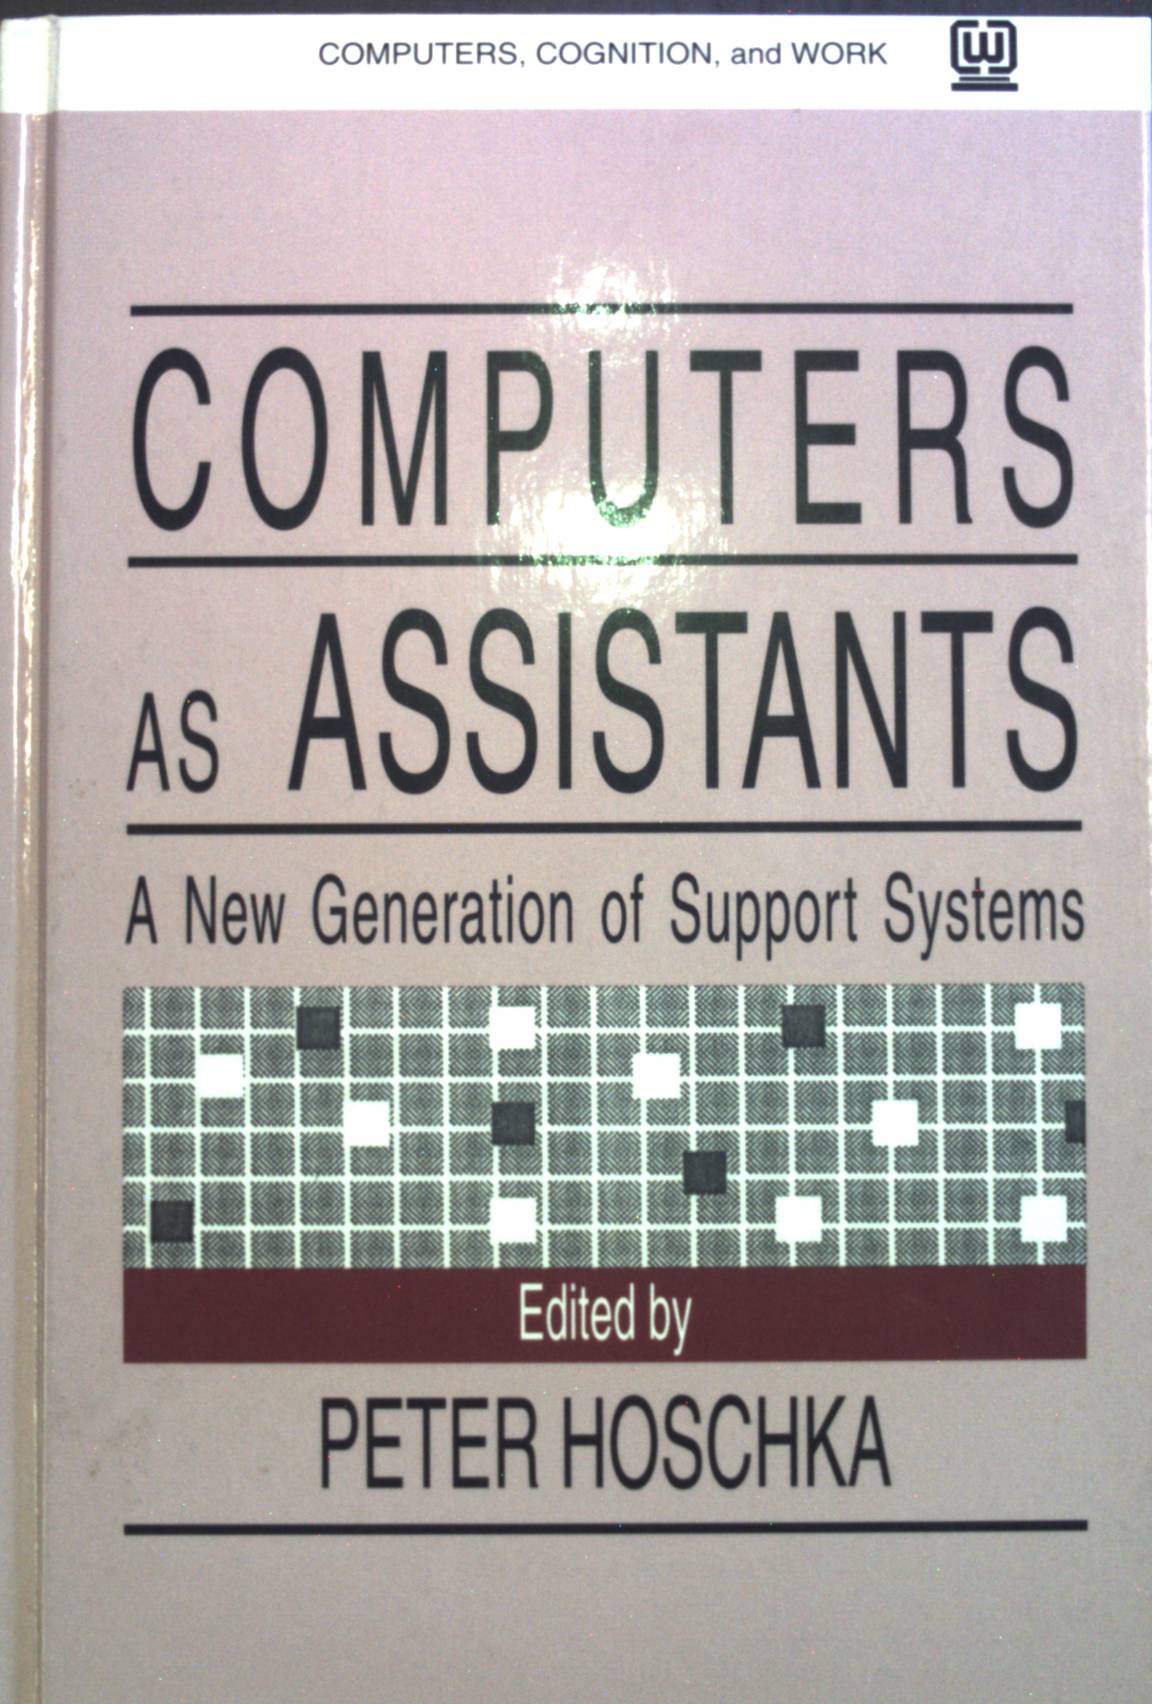 Computers as Assistants: A new Generation of Support Systems. Computers, Cognition and Work - Hoschka, Peter